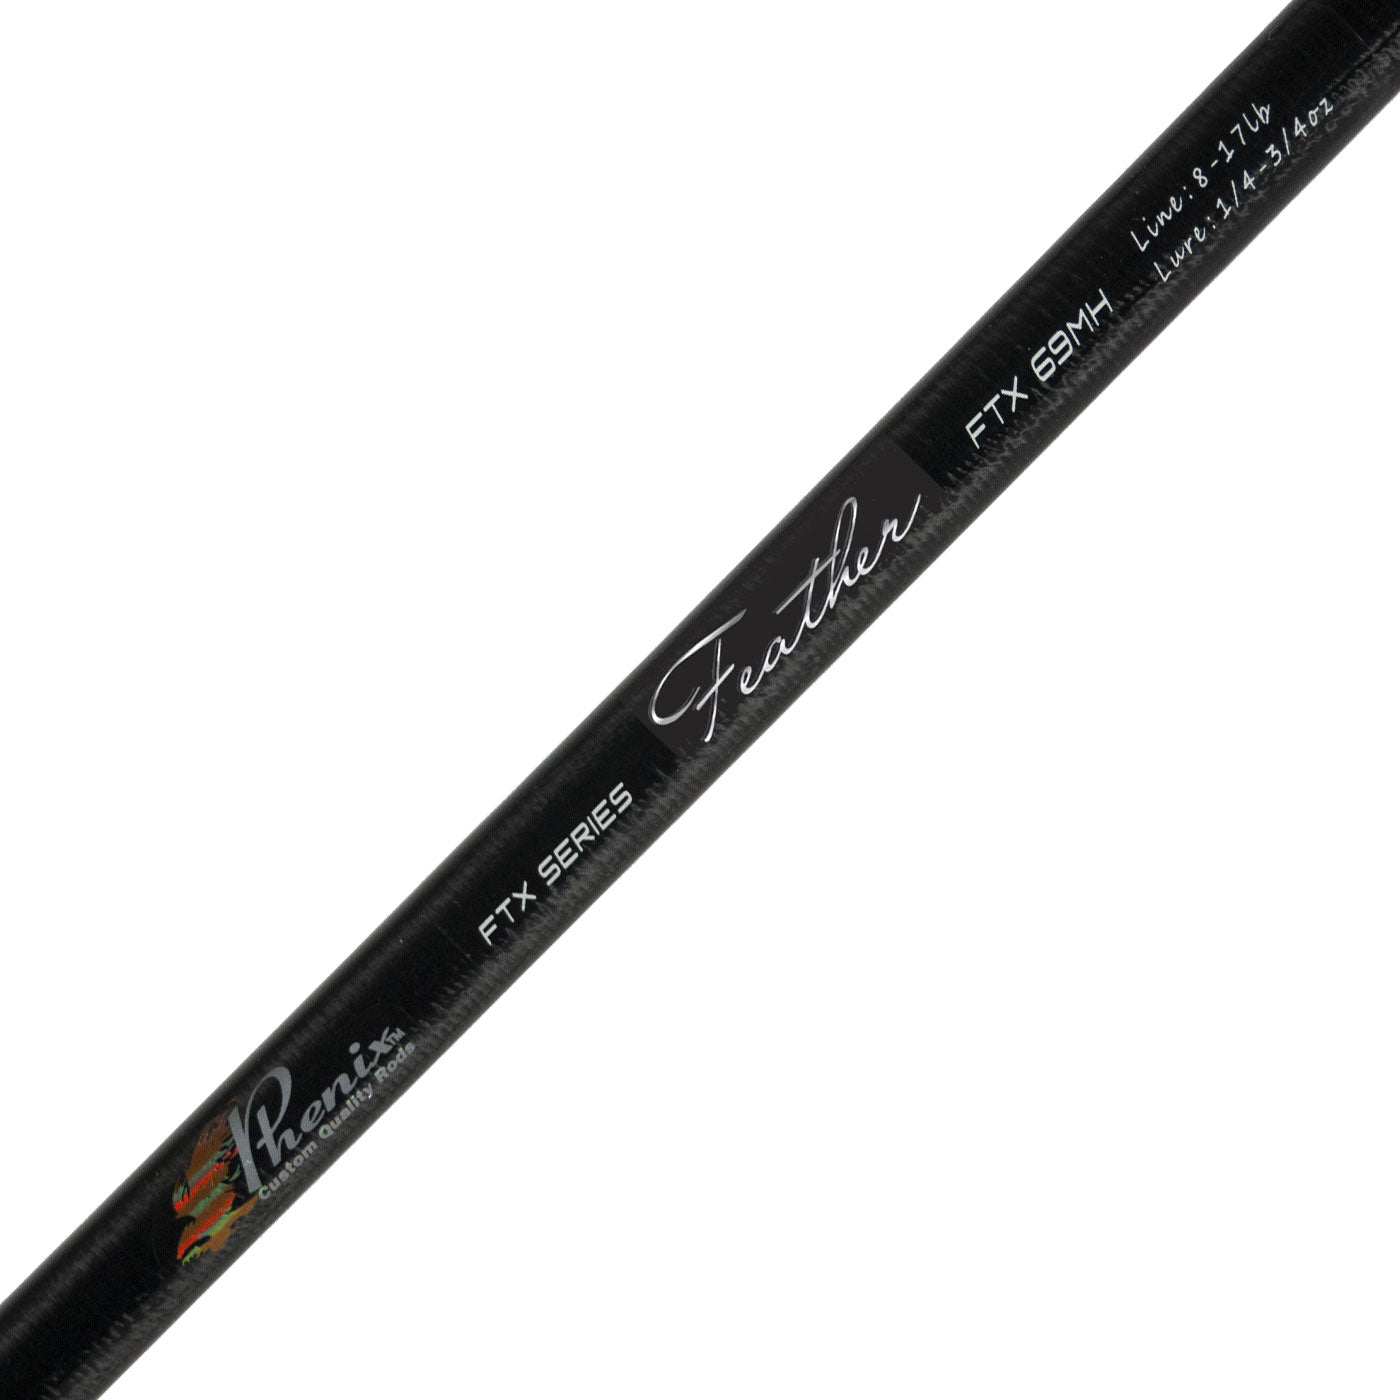 Feather Freshwater Casting Rod Blank FTX-C 71ML